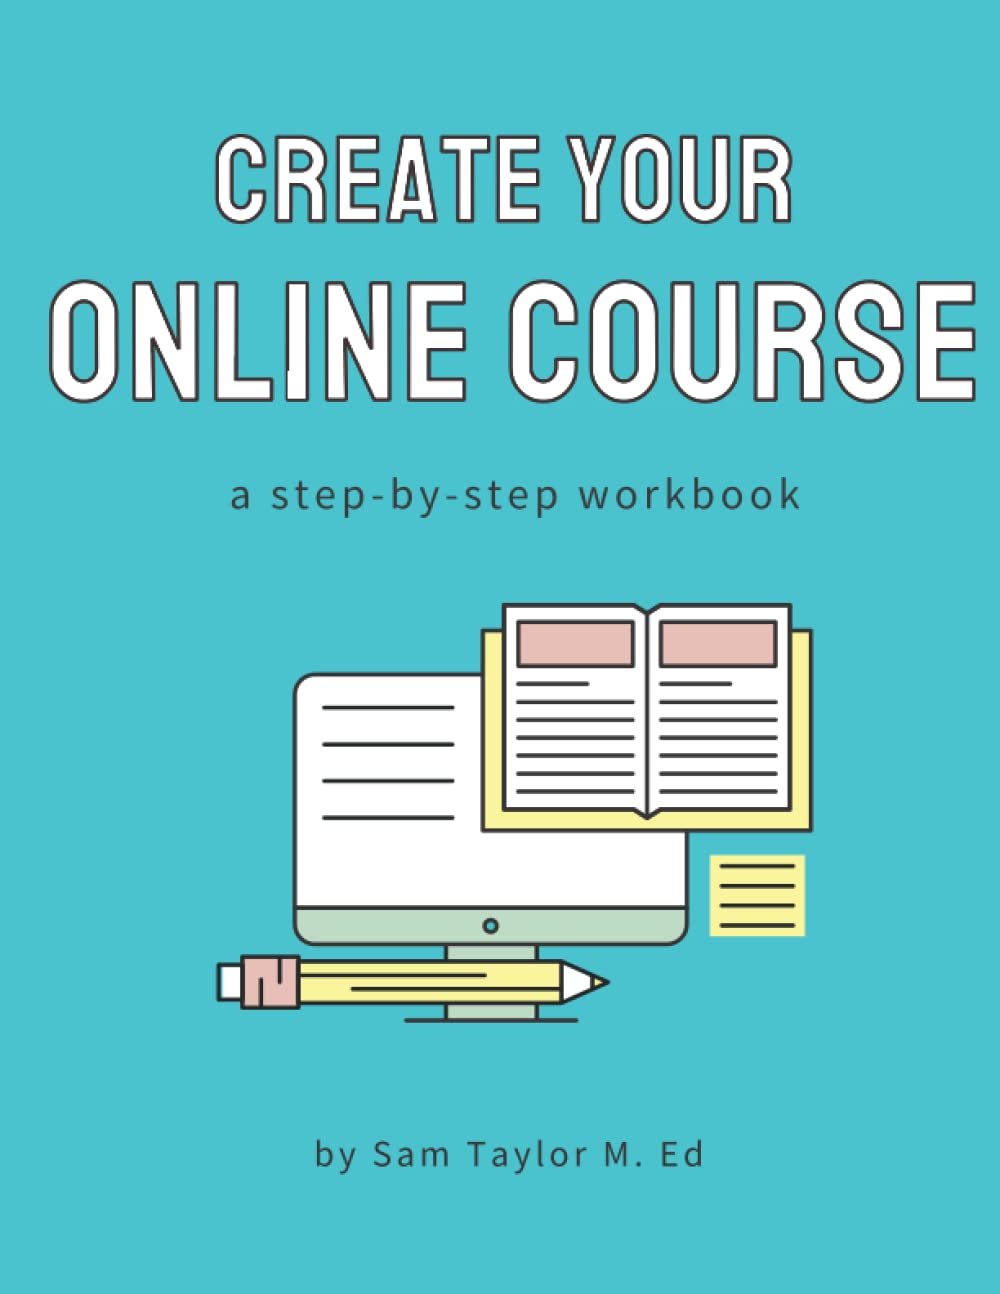 Create Your Online Course by Sam Taylor M. Ed